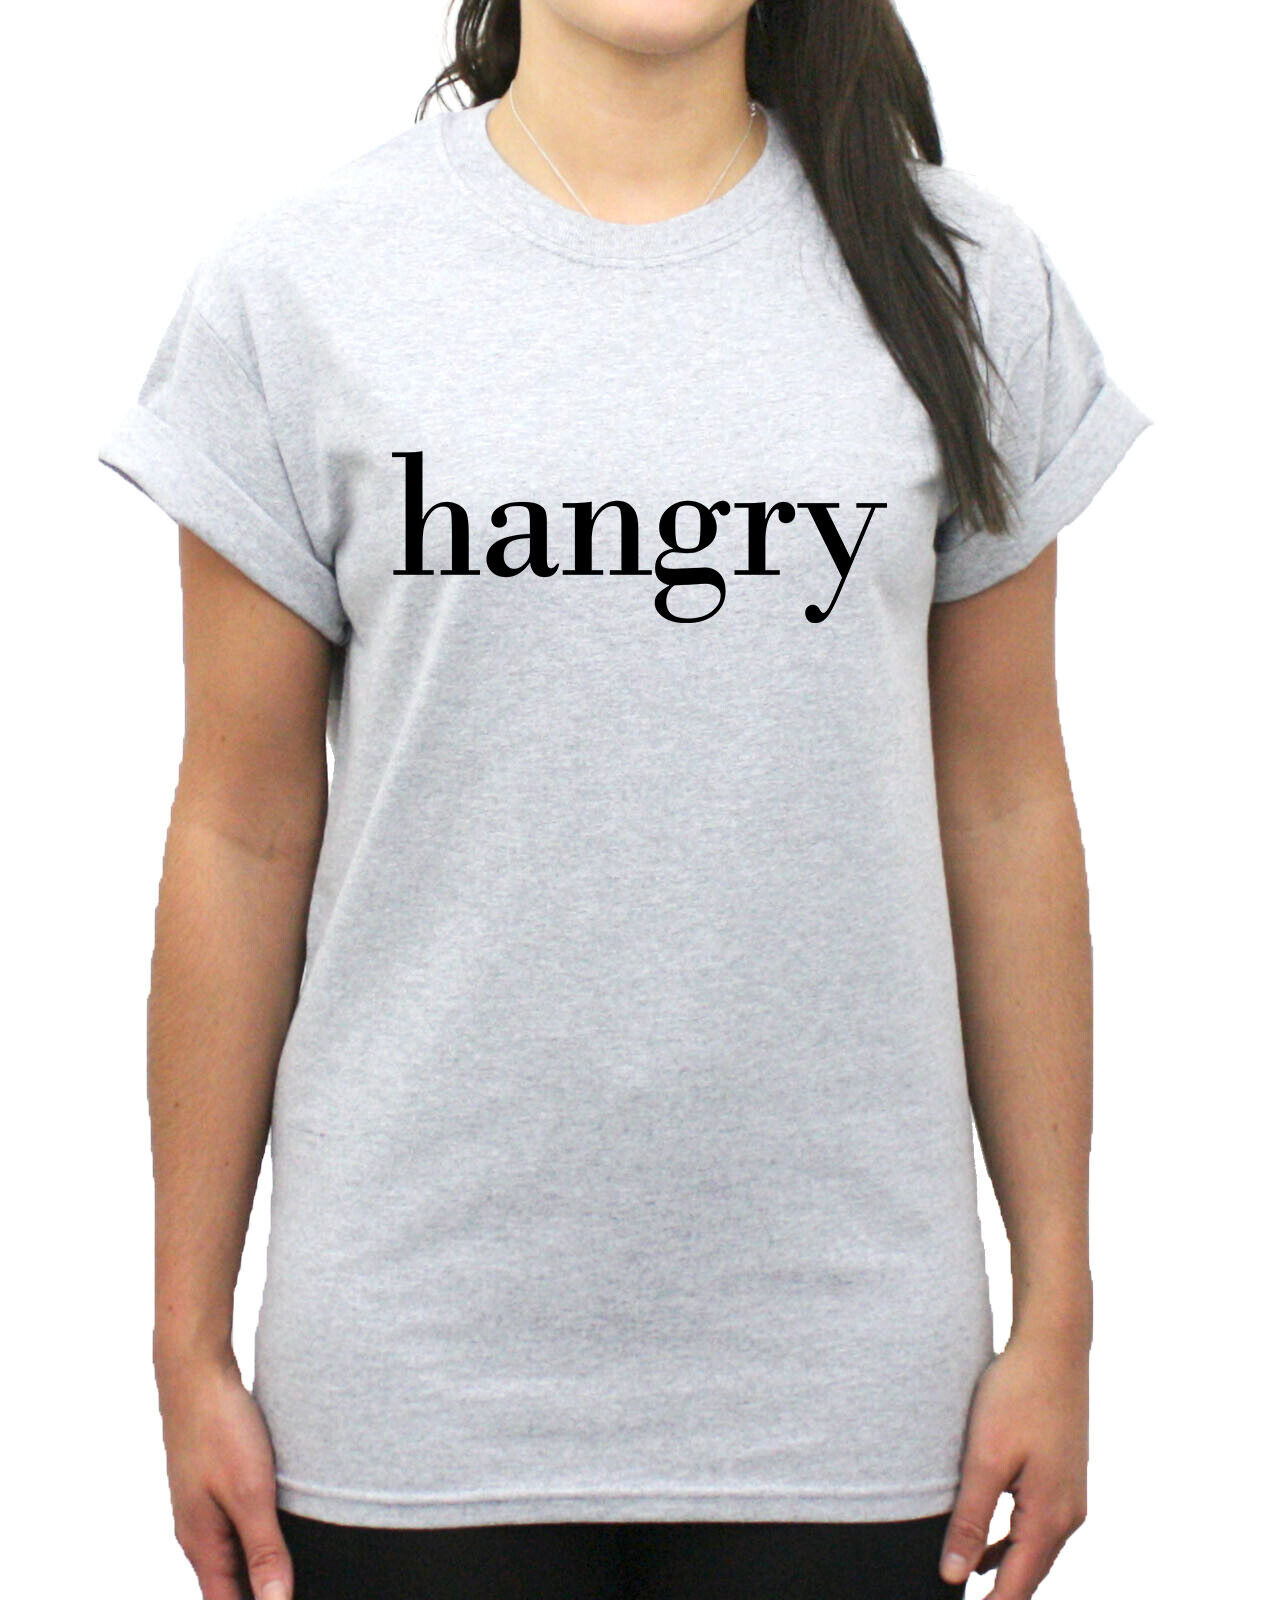 Hangry T-Shirt Funny Hungry and Angry Top Men Women Kids Slogan T Shirt  L226 eBay